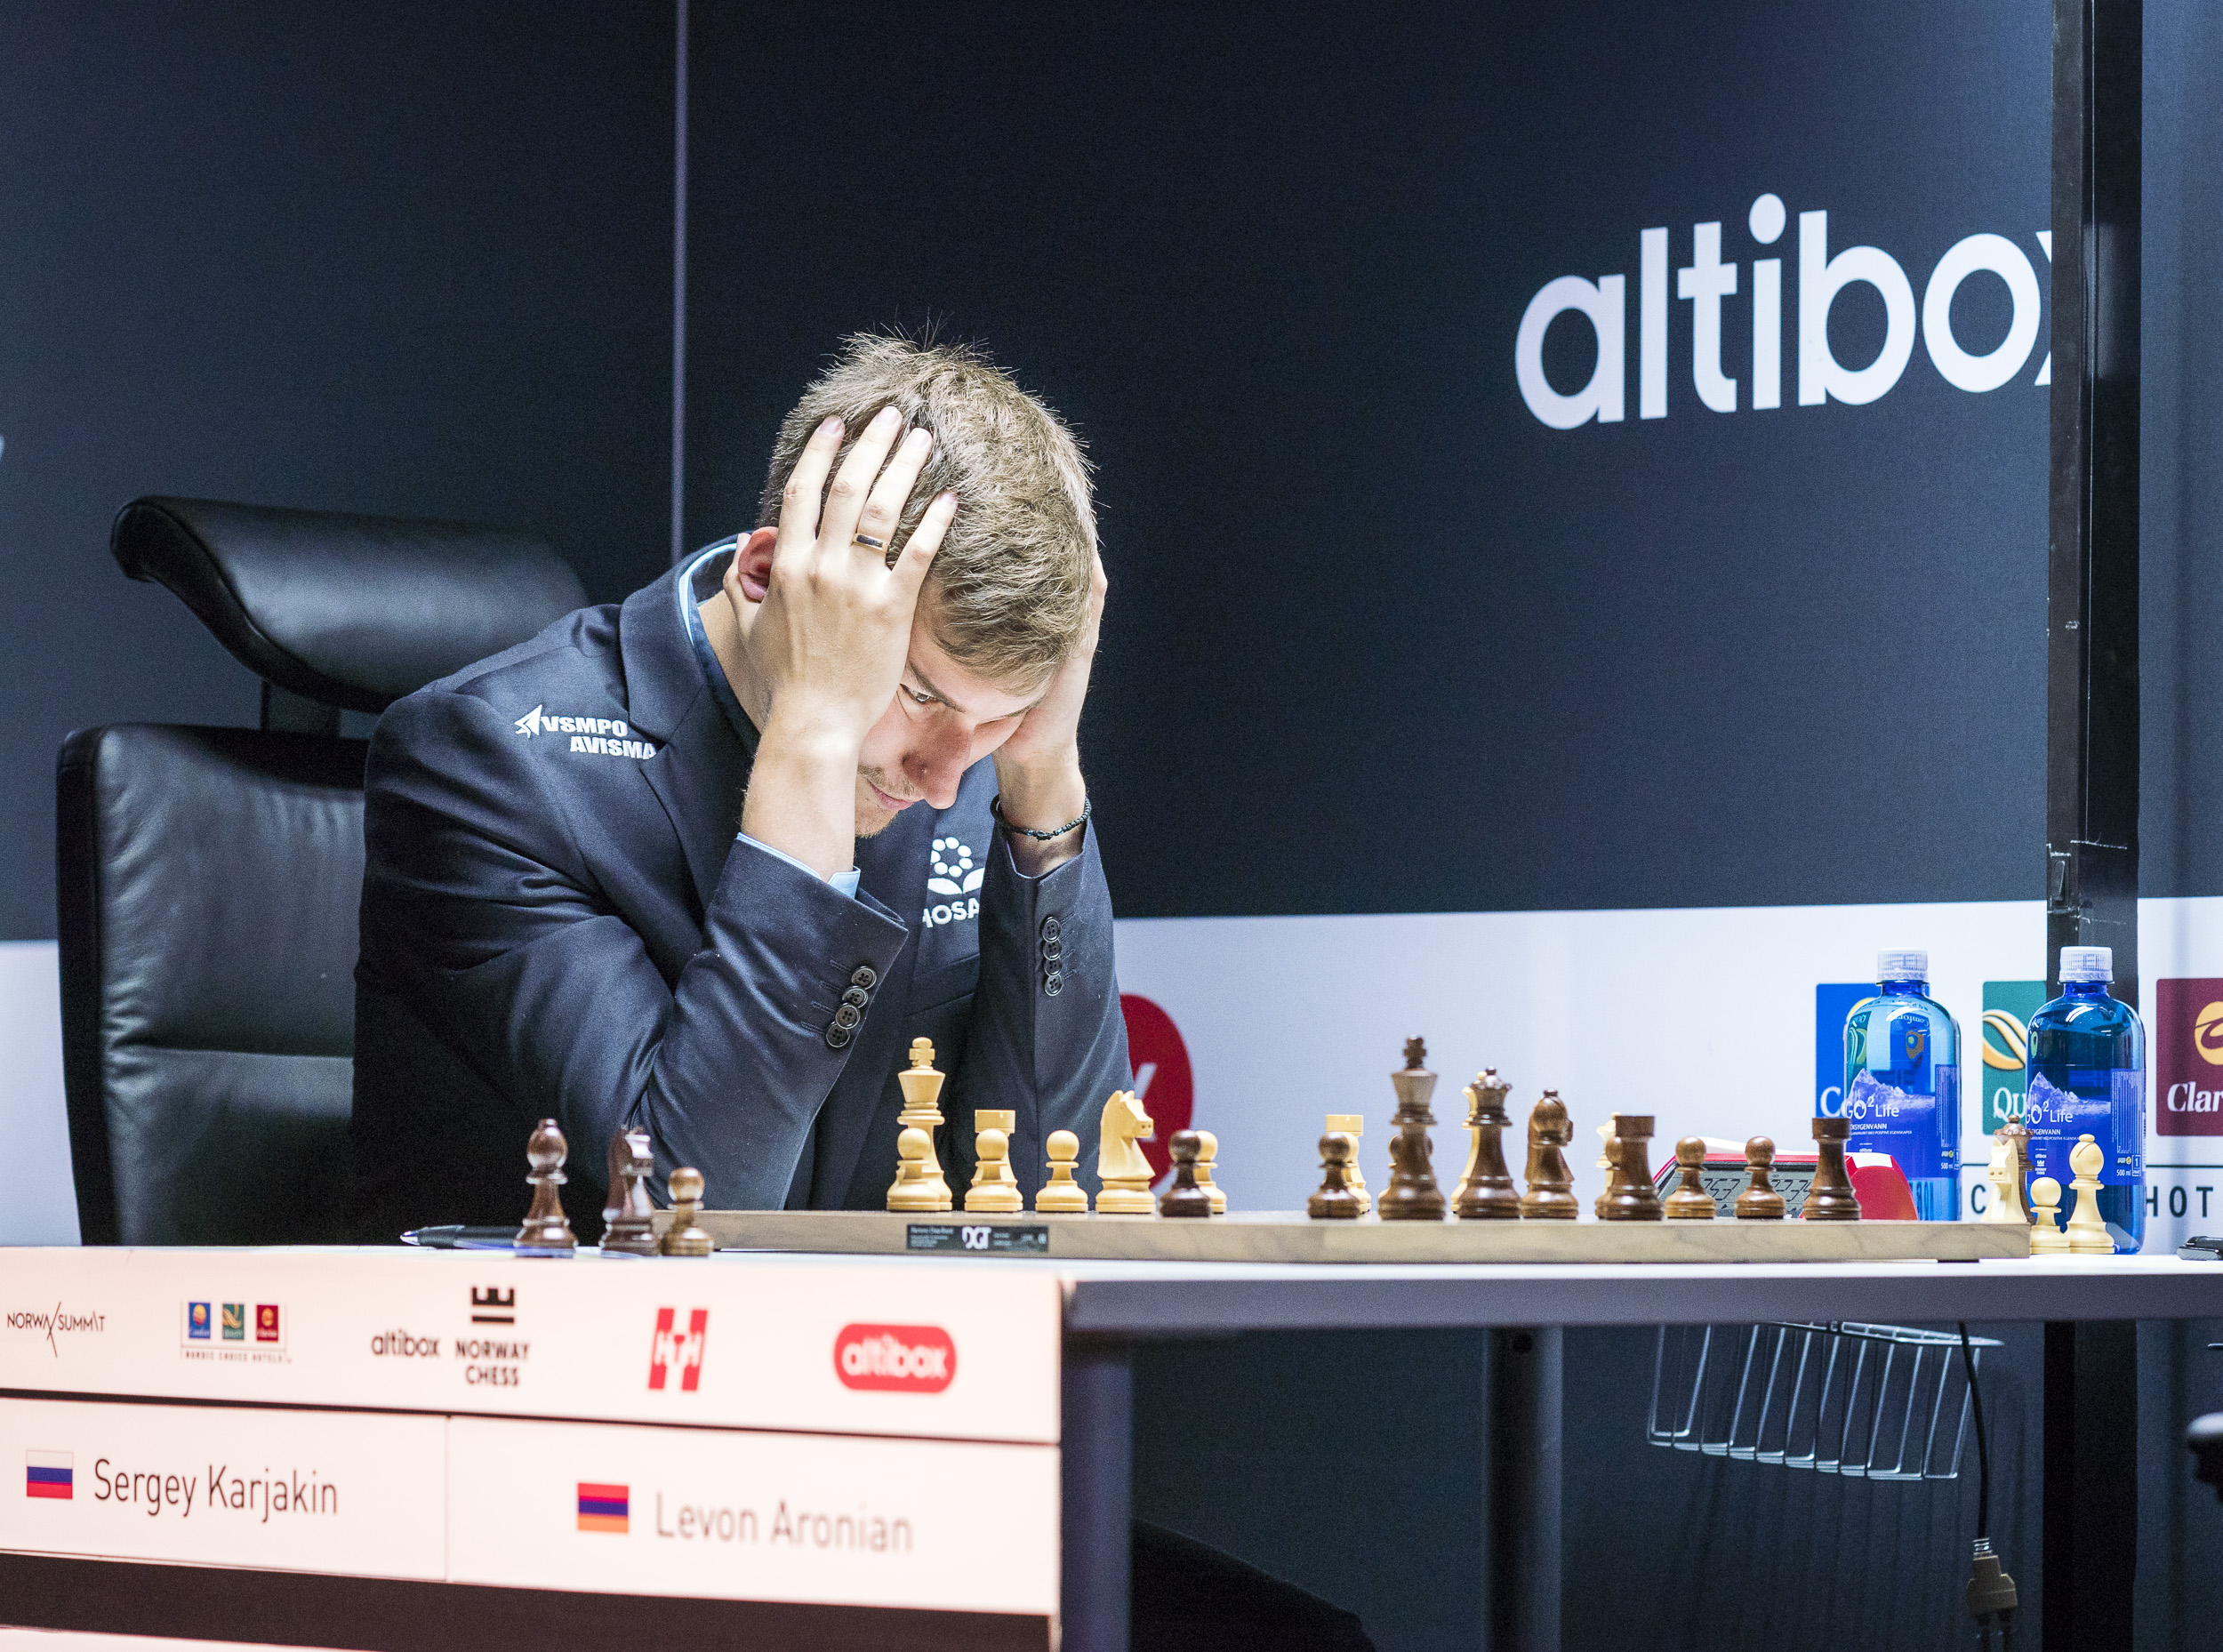 Altibox Norway Chess 2018 Preview